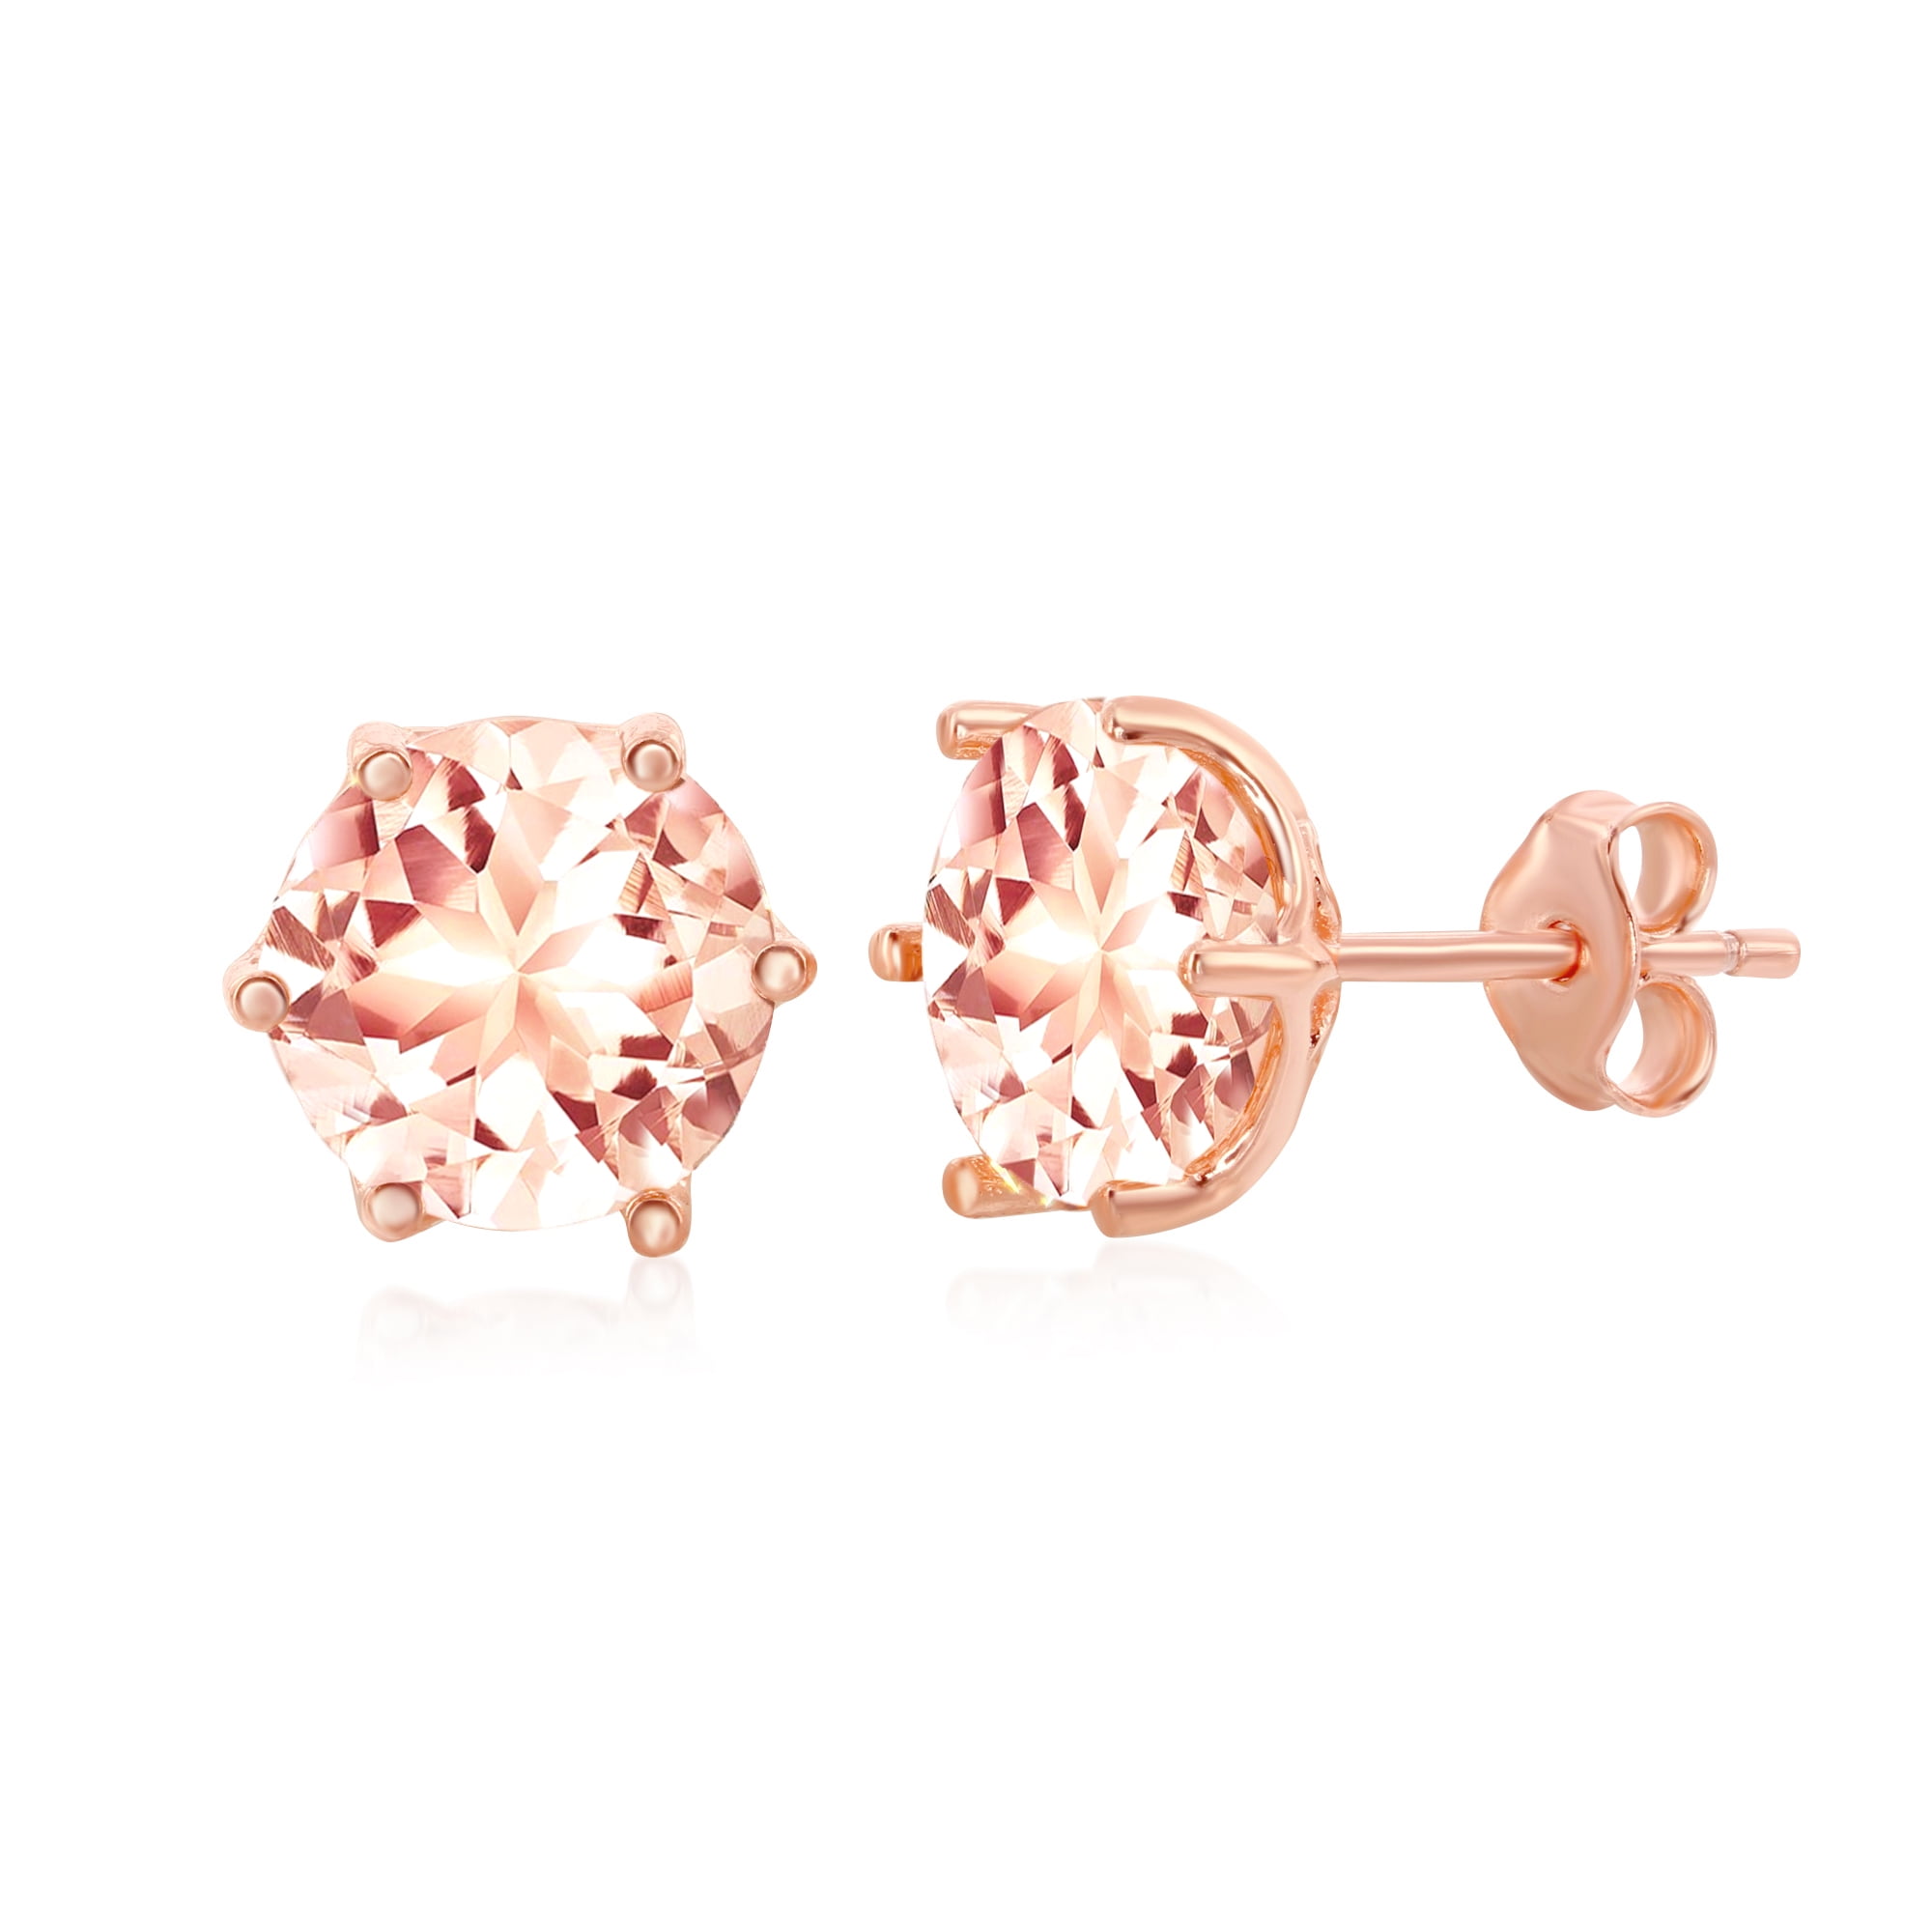 Round Cut Simulated Yellow Sapphire Floating Stud Earrings In 18K Rose Gold Over Sterling Silver